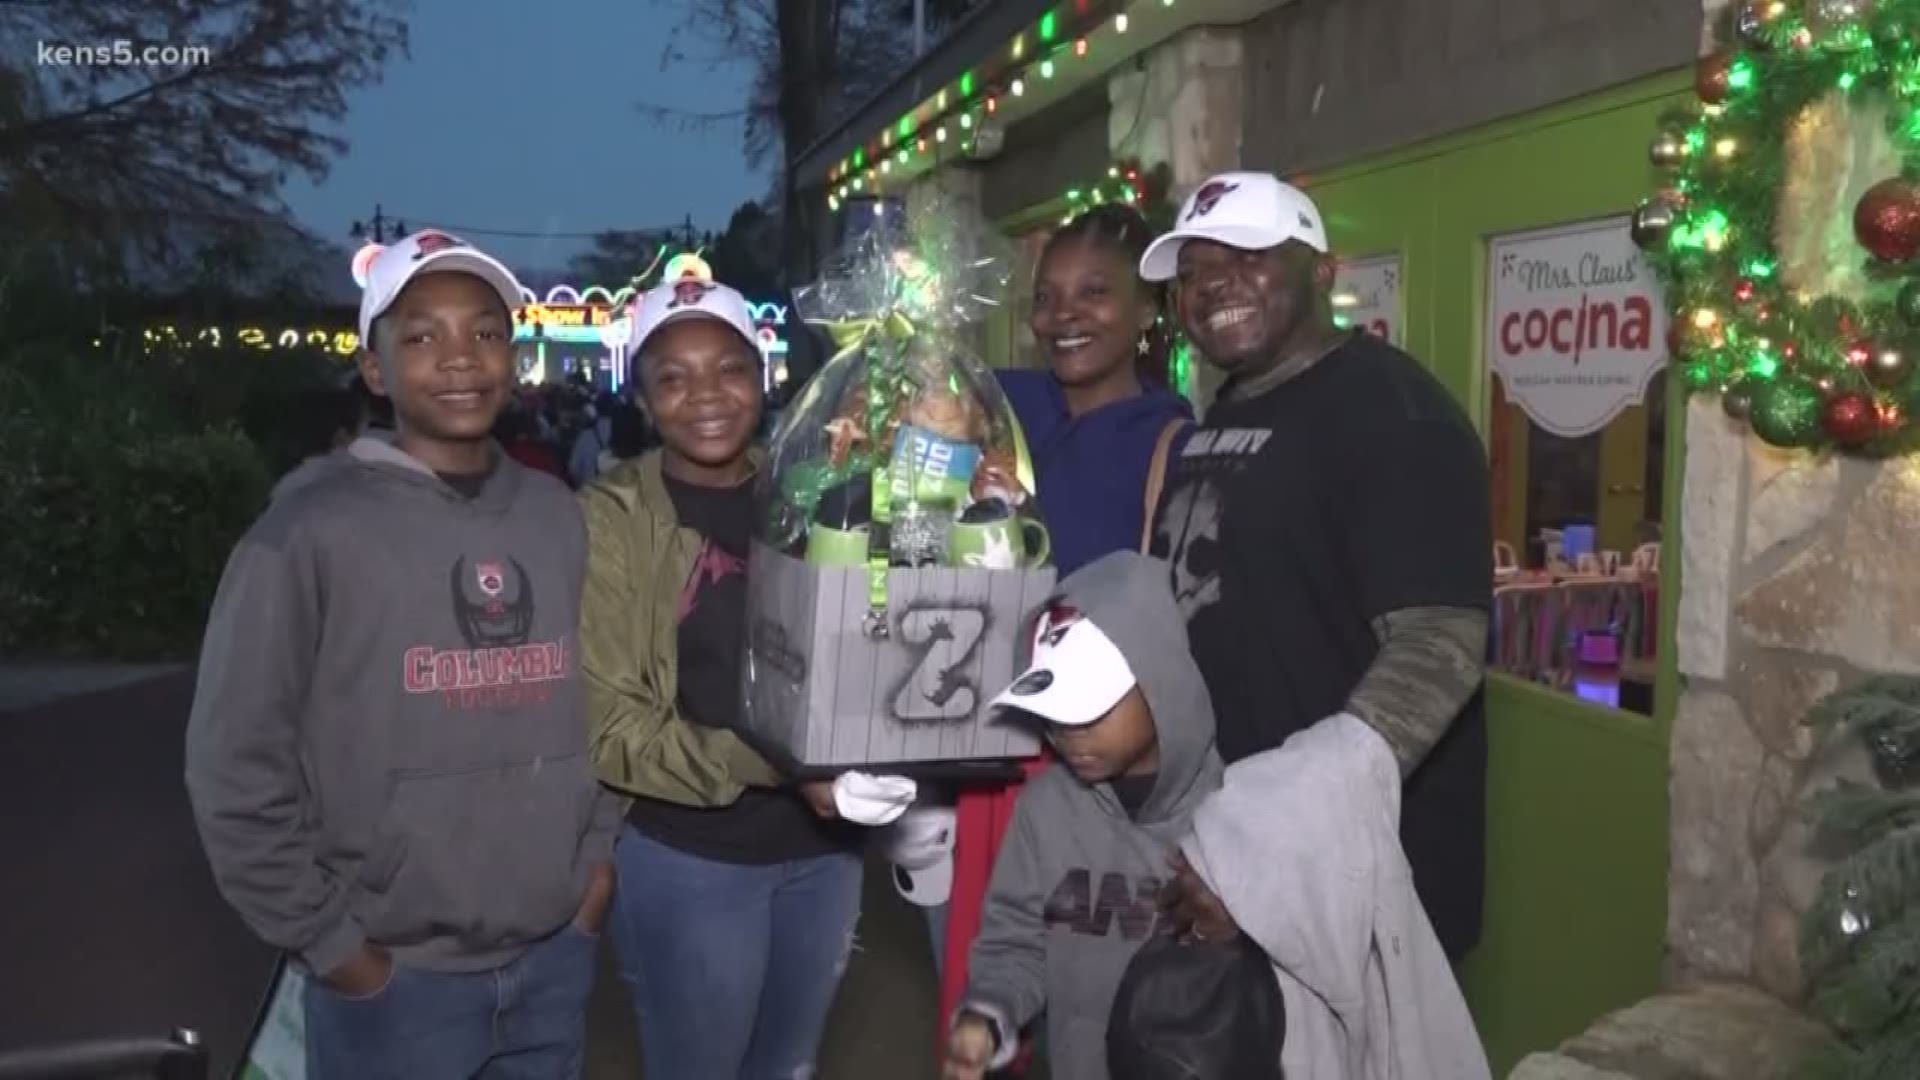 Two local families who've fallen on hard times got an early Christmas surprise at the San Antonio Zoo. Eyewitness News reporter Henry Ramos was there as the families were showered with love.